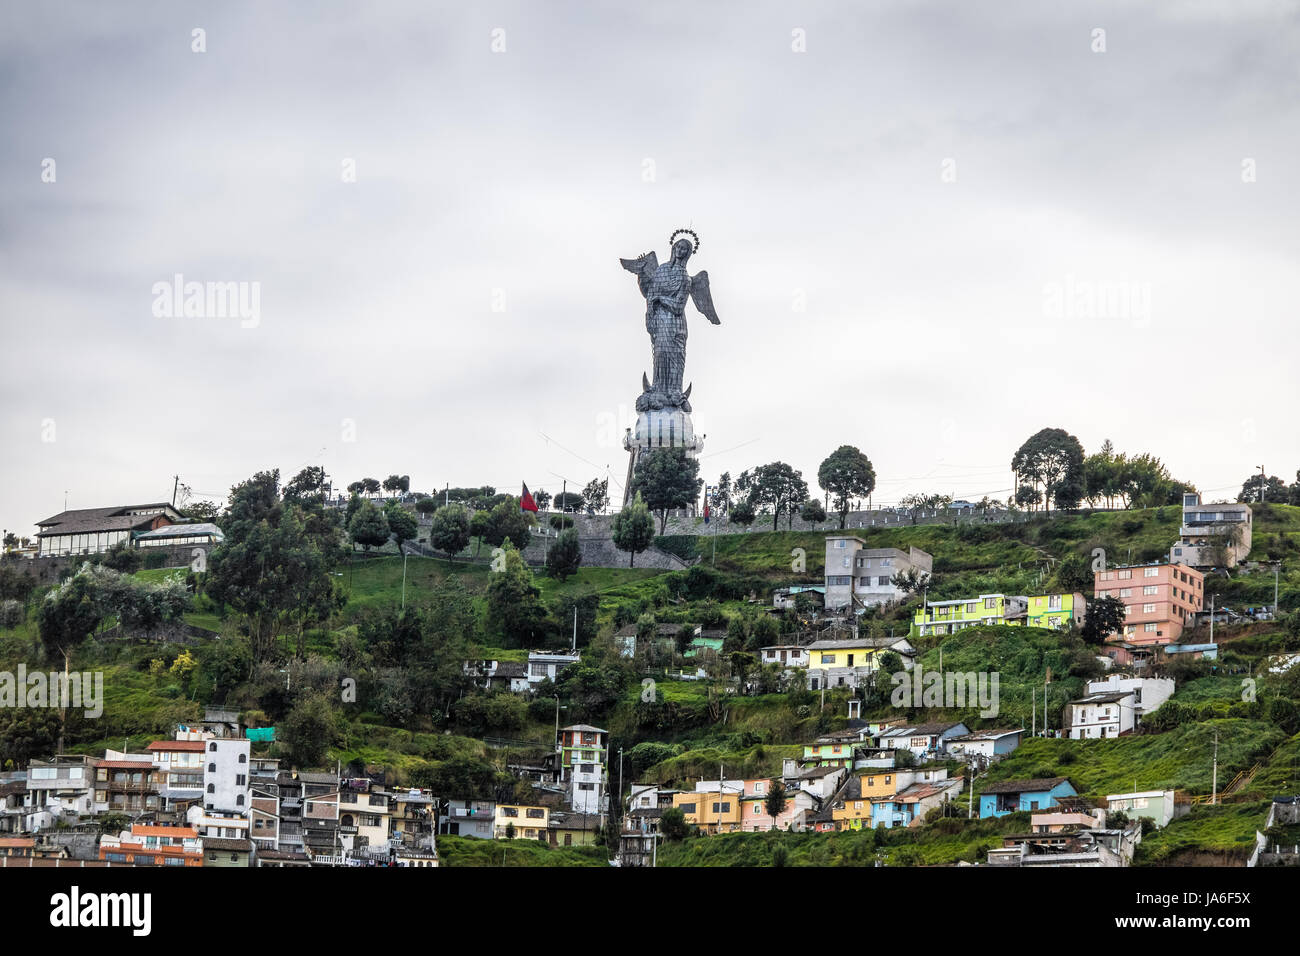 Monument to the Virgin Mary on the top of El Panecillo Hill - Quito, Ecuador Stock Photo